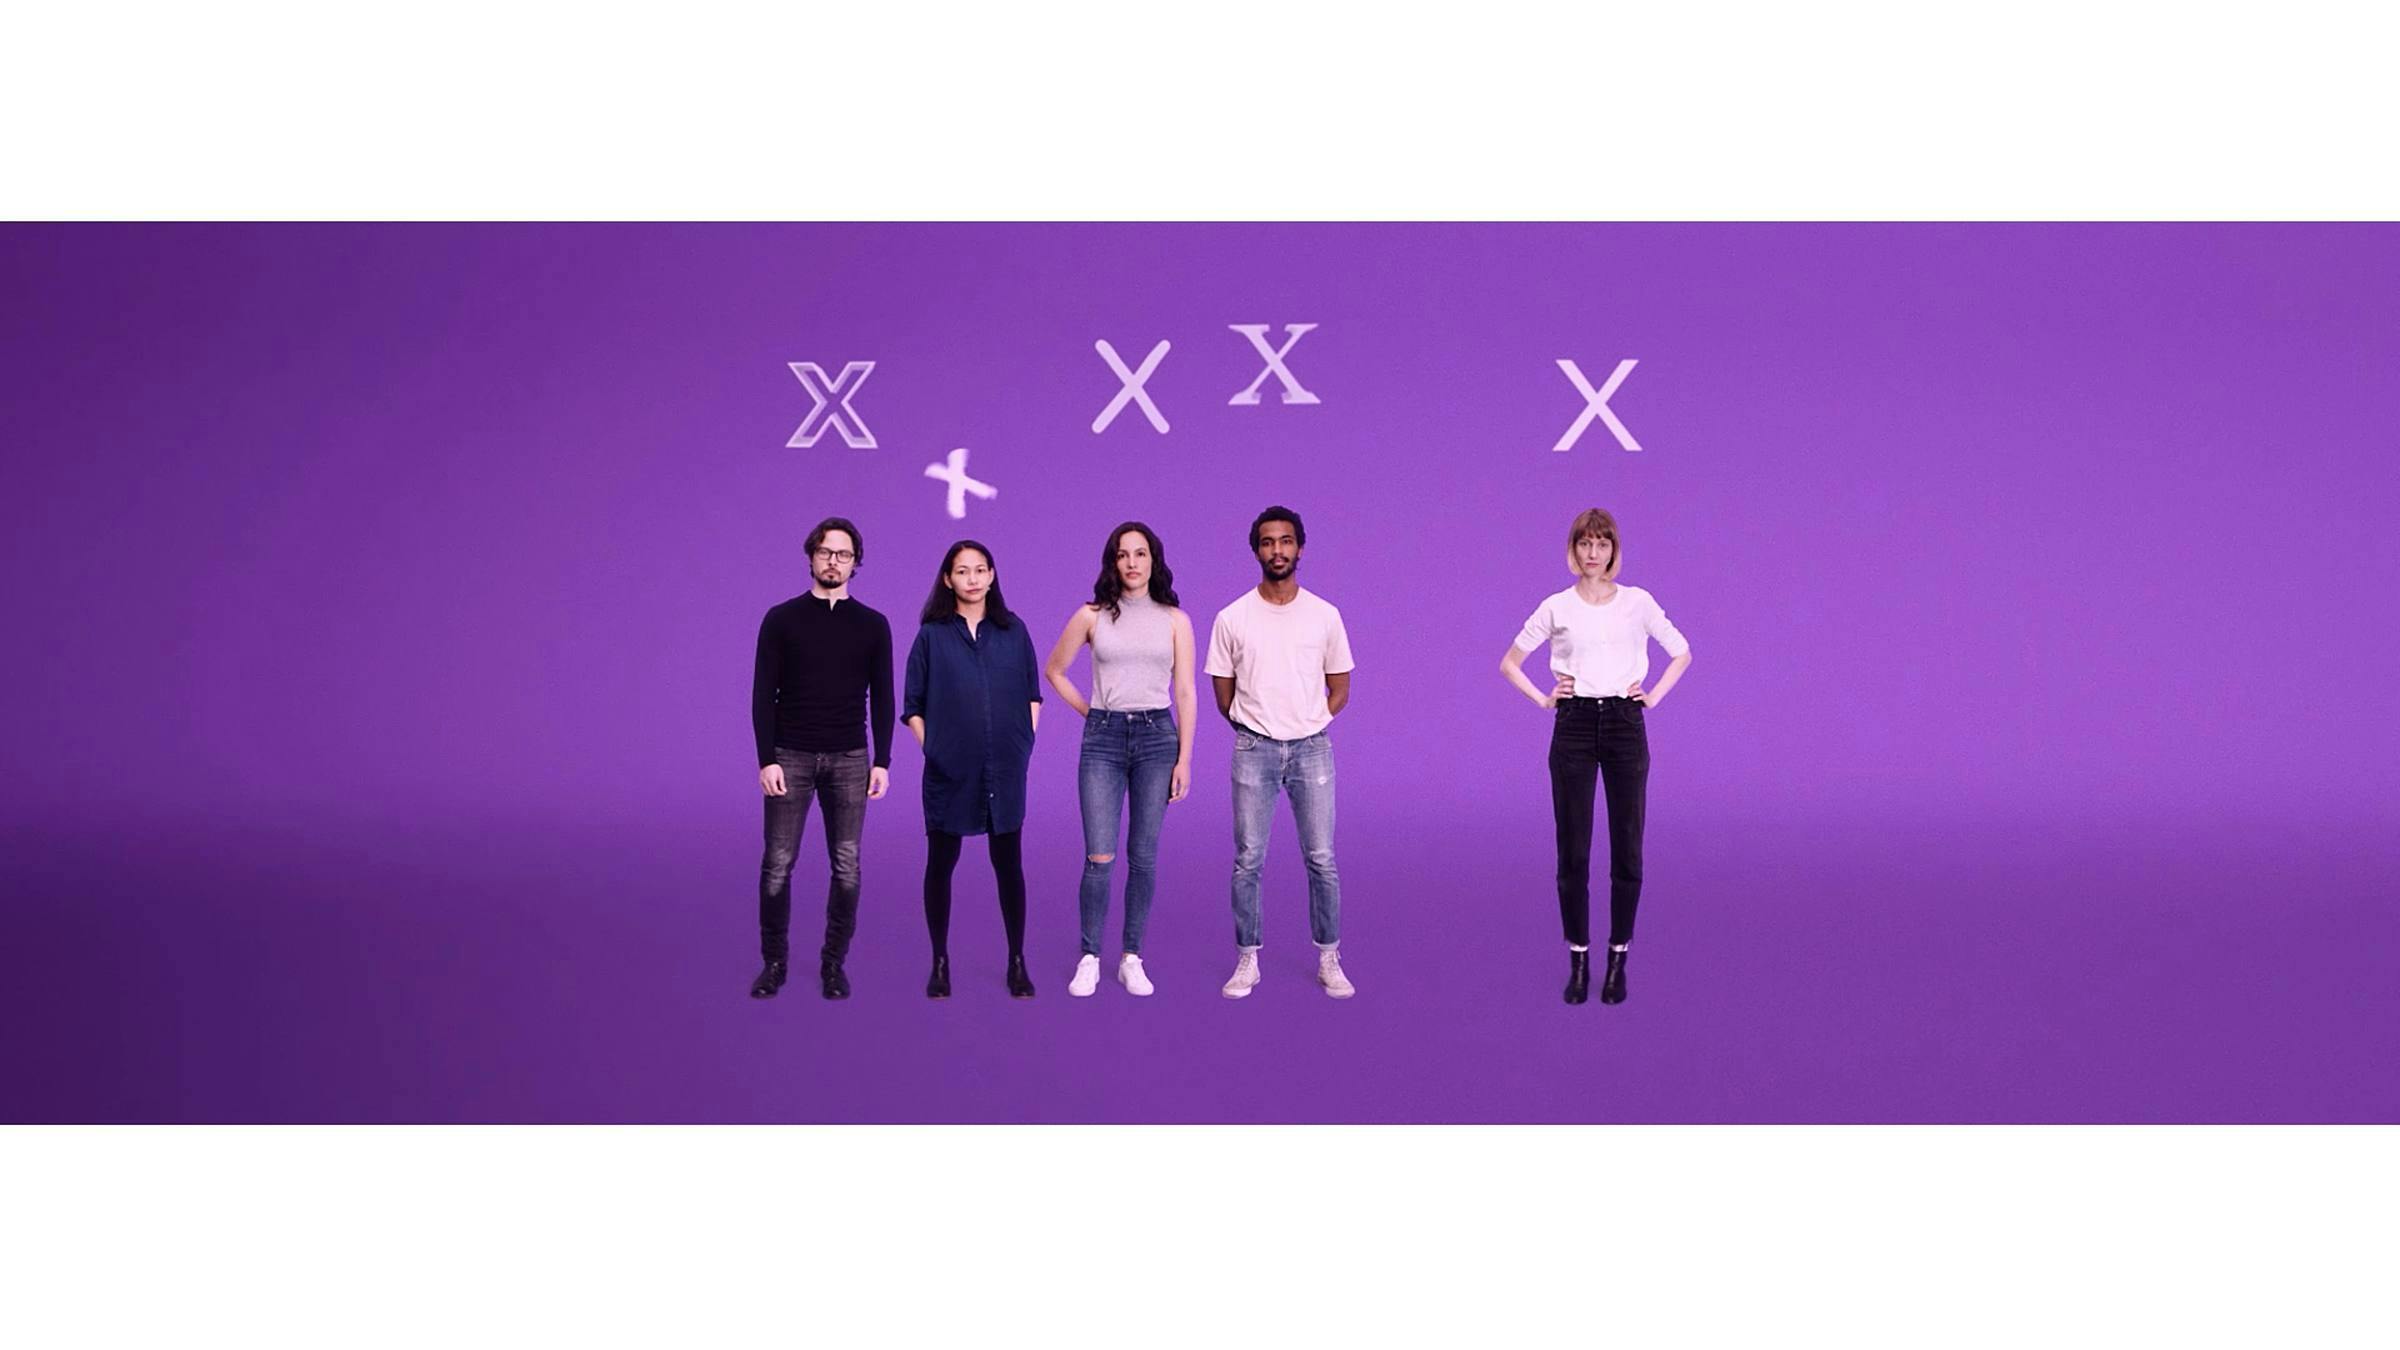 A group of people stand in front of a purple background, they each have the letter X above their heads